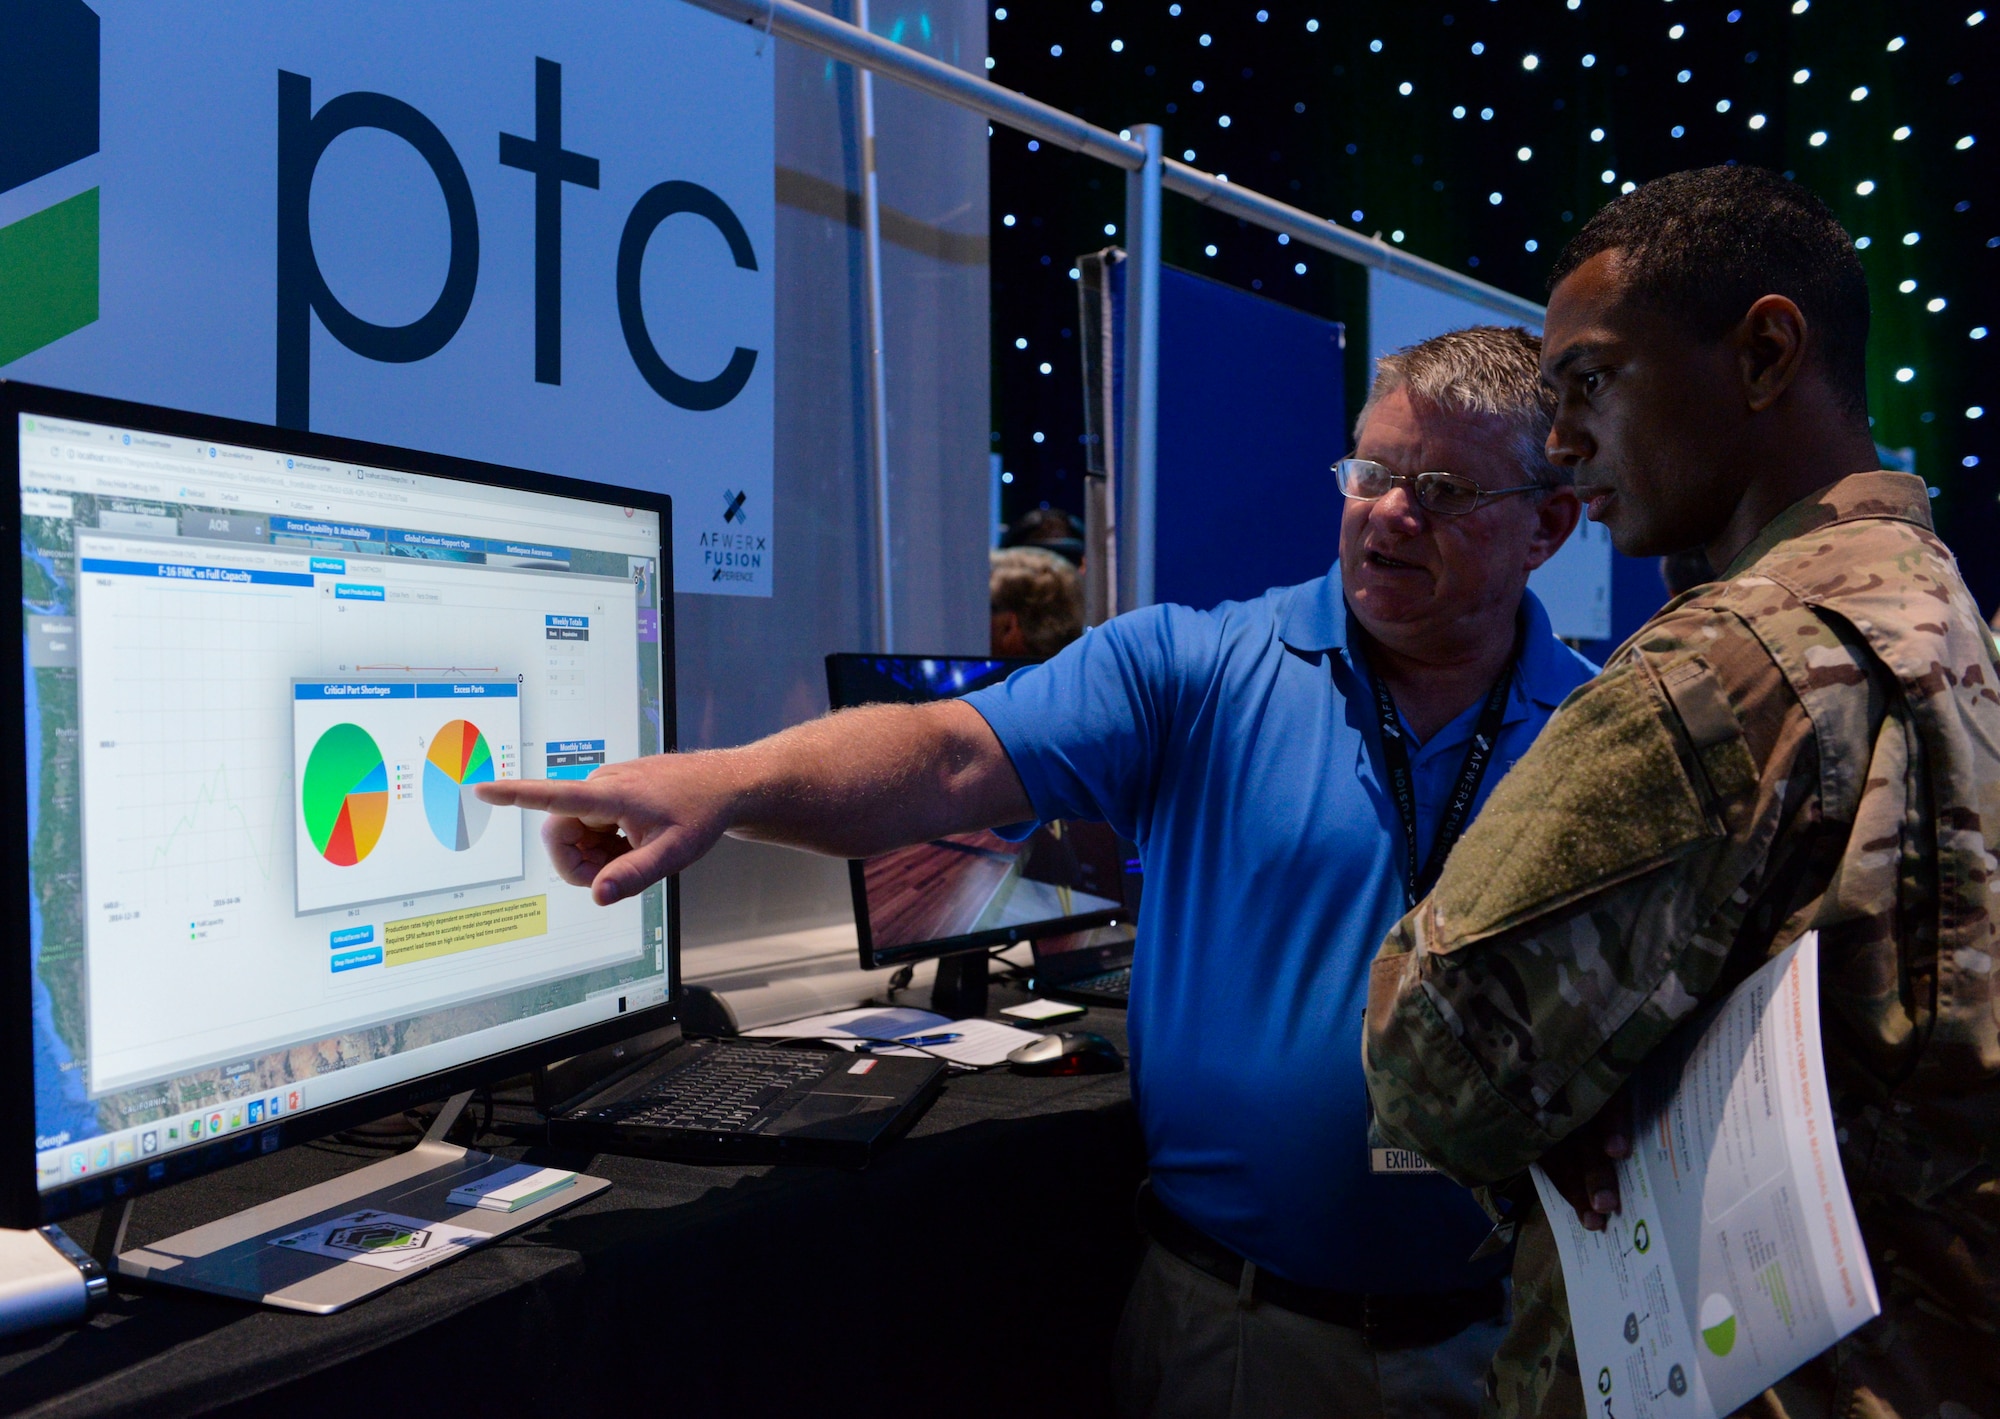 Todd Stecker, exhibitor for PTC, presents his innovative perimeter security ideas to Airman 1st Class Michael Hickson, client system technician assigned to the 353 Special Operations Support Squadron at Kadena Air Base, Japan, at the AFWERX Fusion Experience event in Las Vegas June 20, 2018. Personnel across the Air Force were invited to the event to learn more about instilling a culture of innovation within the military and beyond through a series of presentations, panels and workshops dedicated to perimeter security. (U.S. Air Force photo by Airman Bailee A. Darbasie)